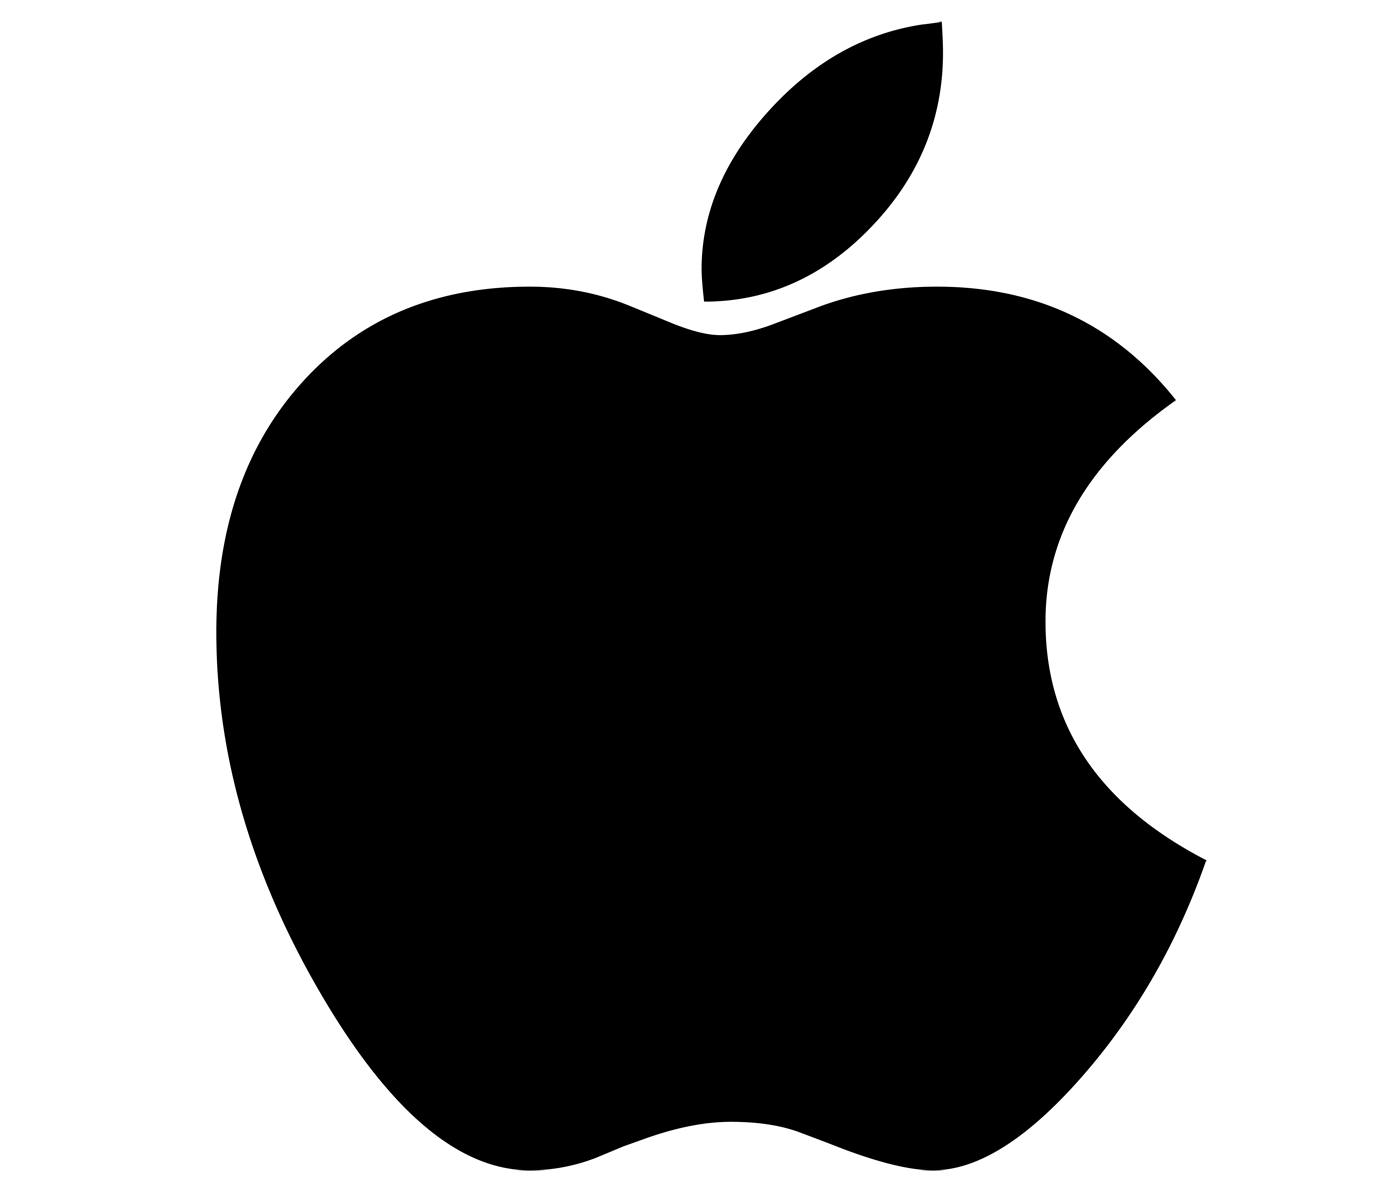 iPhone Logo - iPhone Logo, iPhone Symbol Meaning, History and Evolution